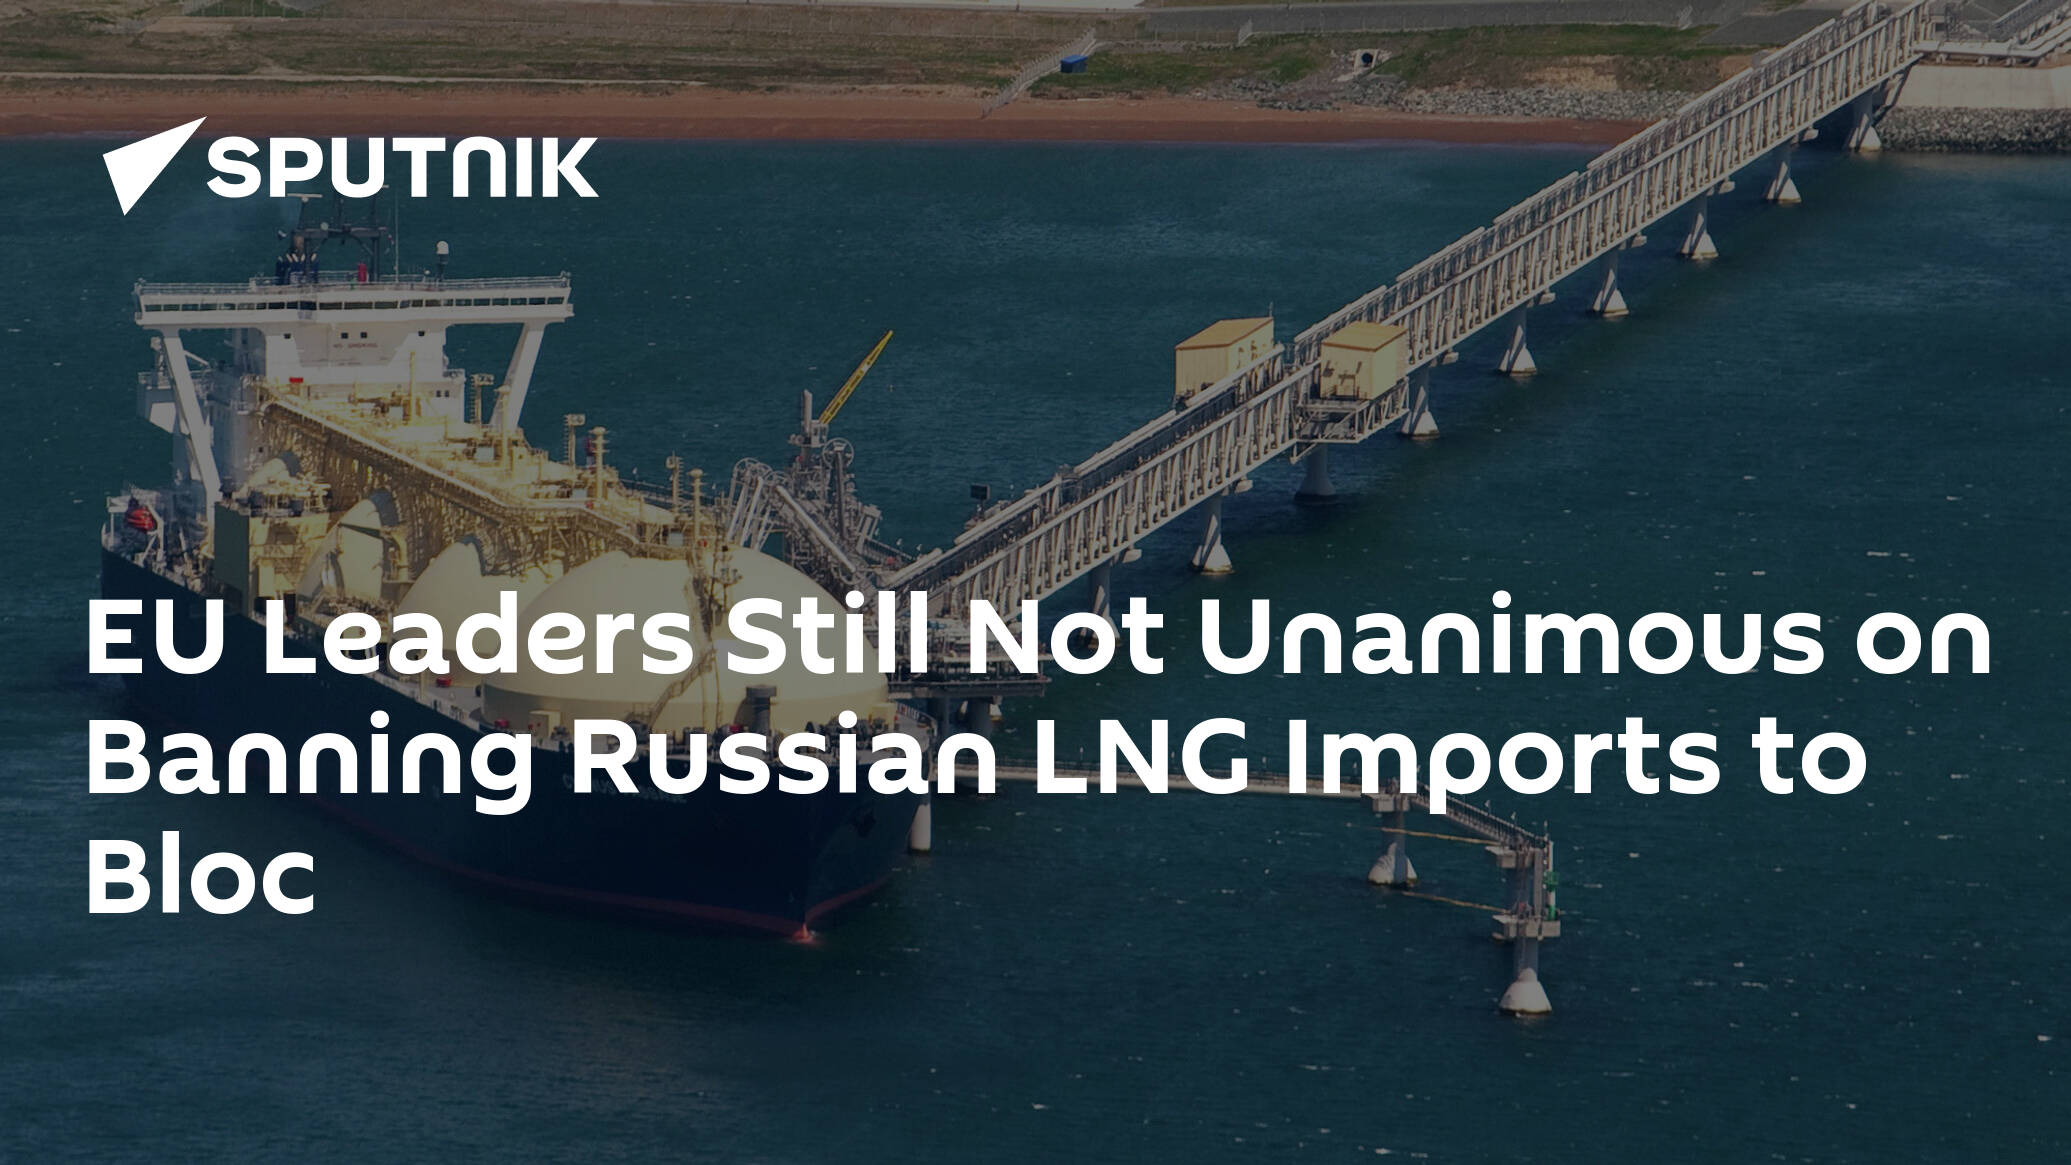 EU Leaders Still Not Unanimous on Banning Russian LNG Imports to Bloc